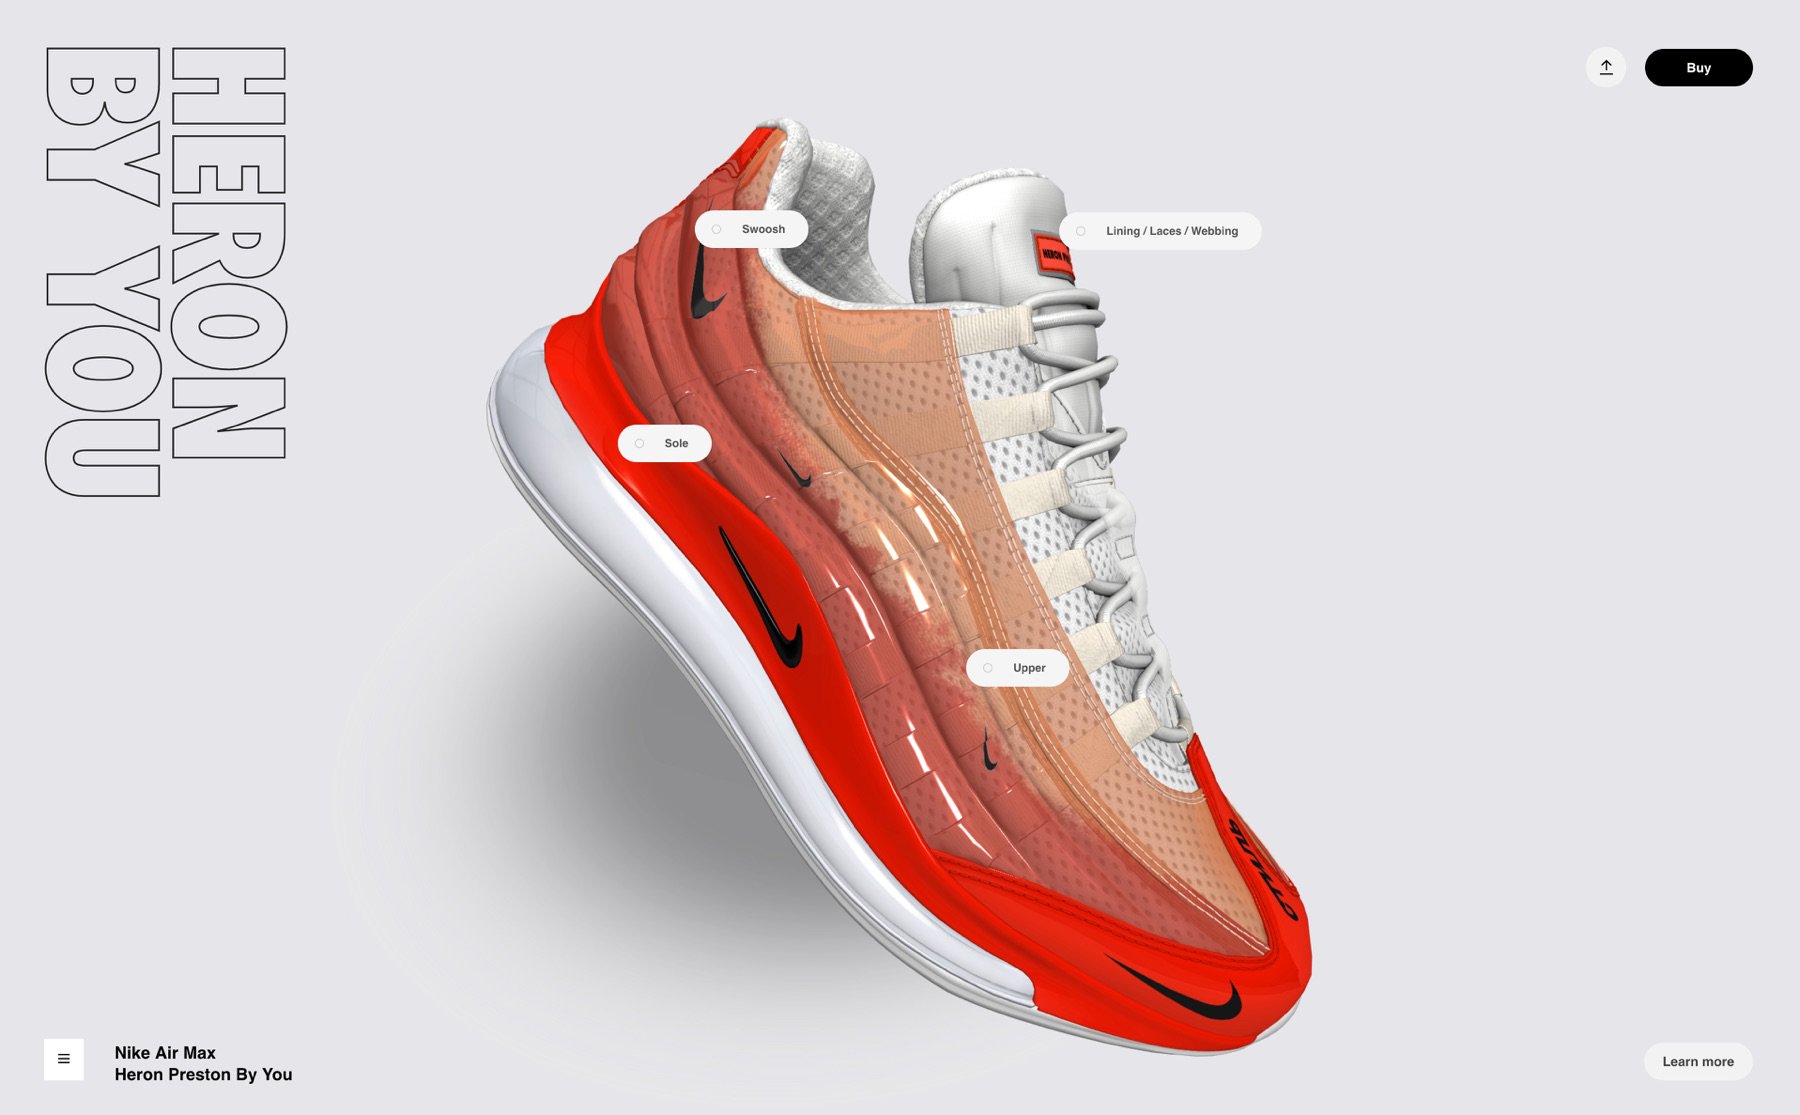 noot Zending Zwaaien J23 iPhone App on Twitter: "Nike By You Launches New 3D Builder Experience  April 15th starting with the Nike Air Max 720/95 Heron Preston By You  Details -&gt; https://t.co/DNU8Av43kD https://t.co/JTFAf7bcO6" / Twitter